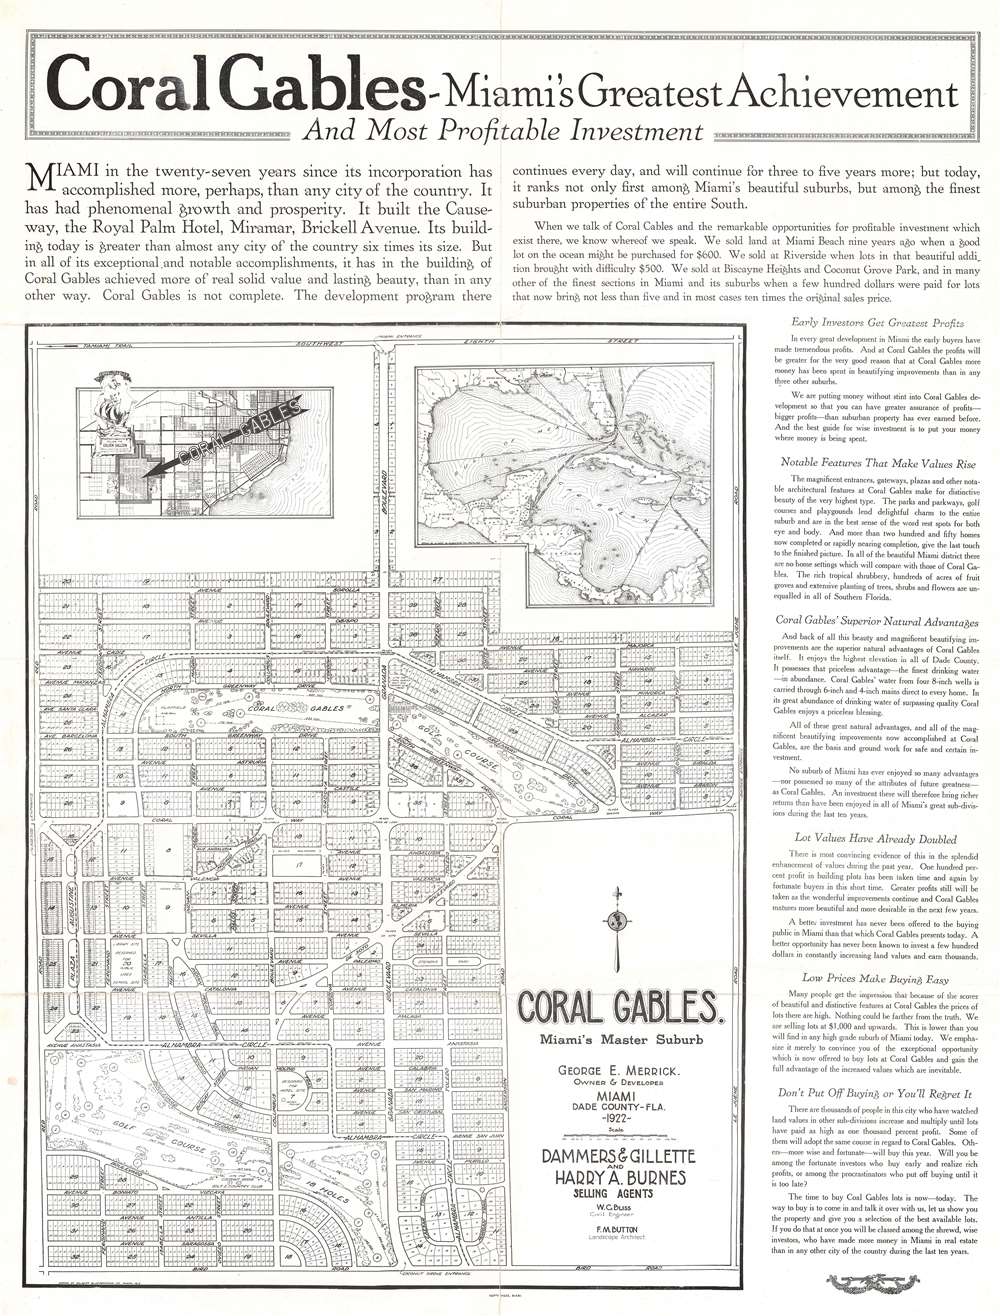 Coral Gables - Miami's Greatest Achievement and Most Profitable Investment. / Coral Gables. Miami's Master Suburb. - Alternate View 2